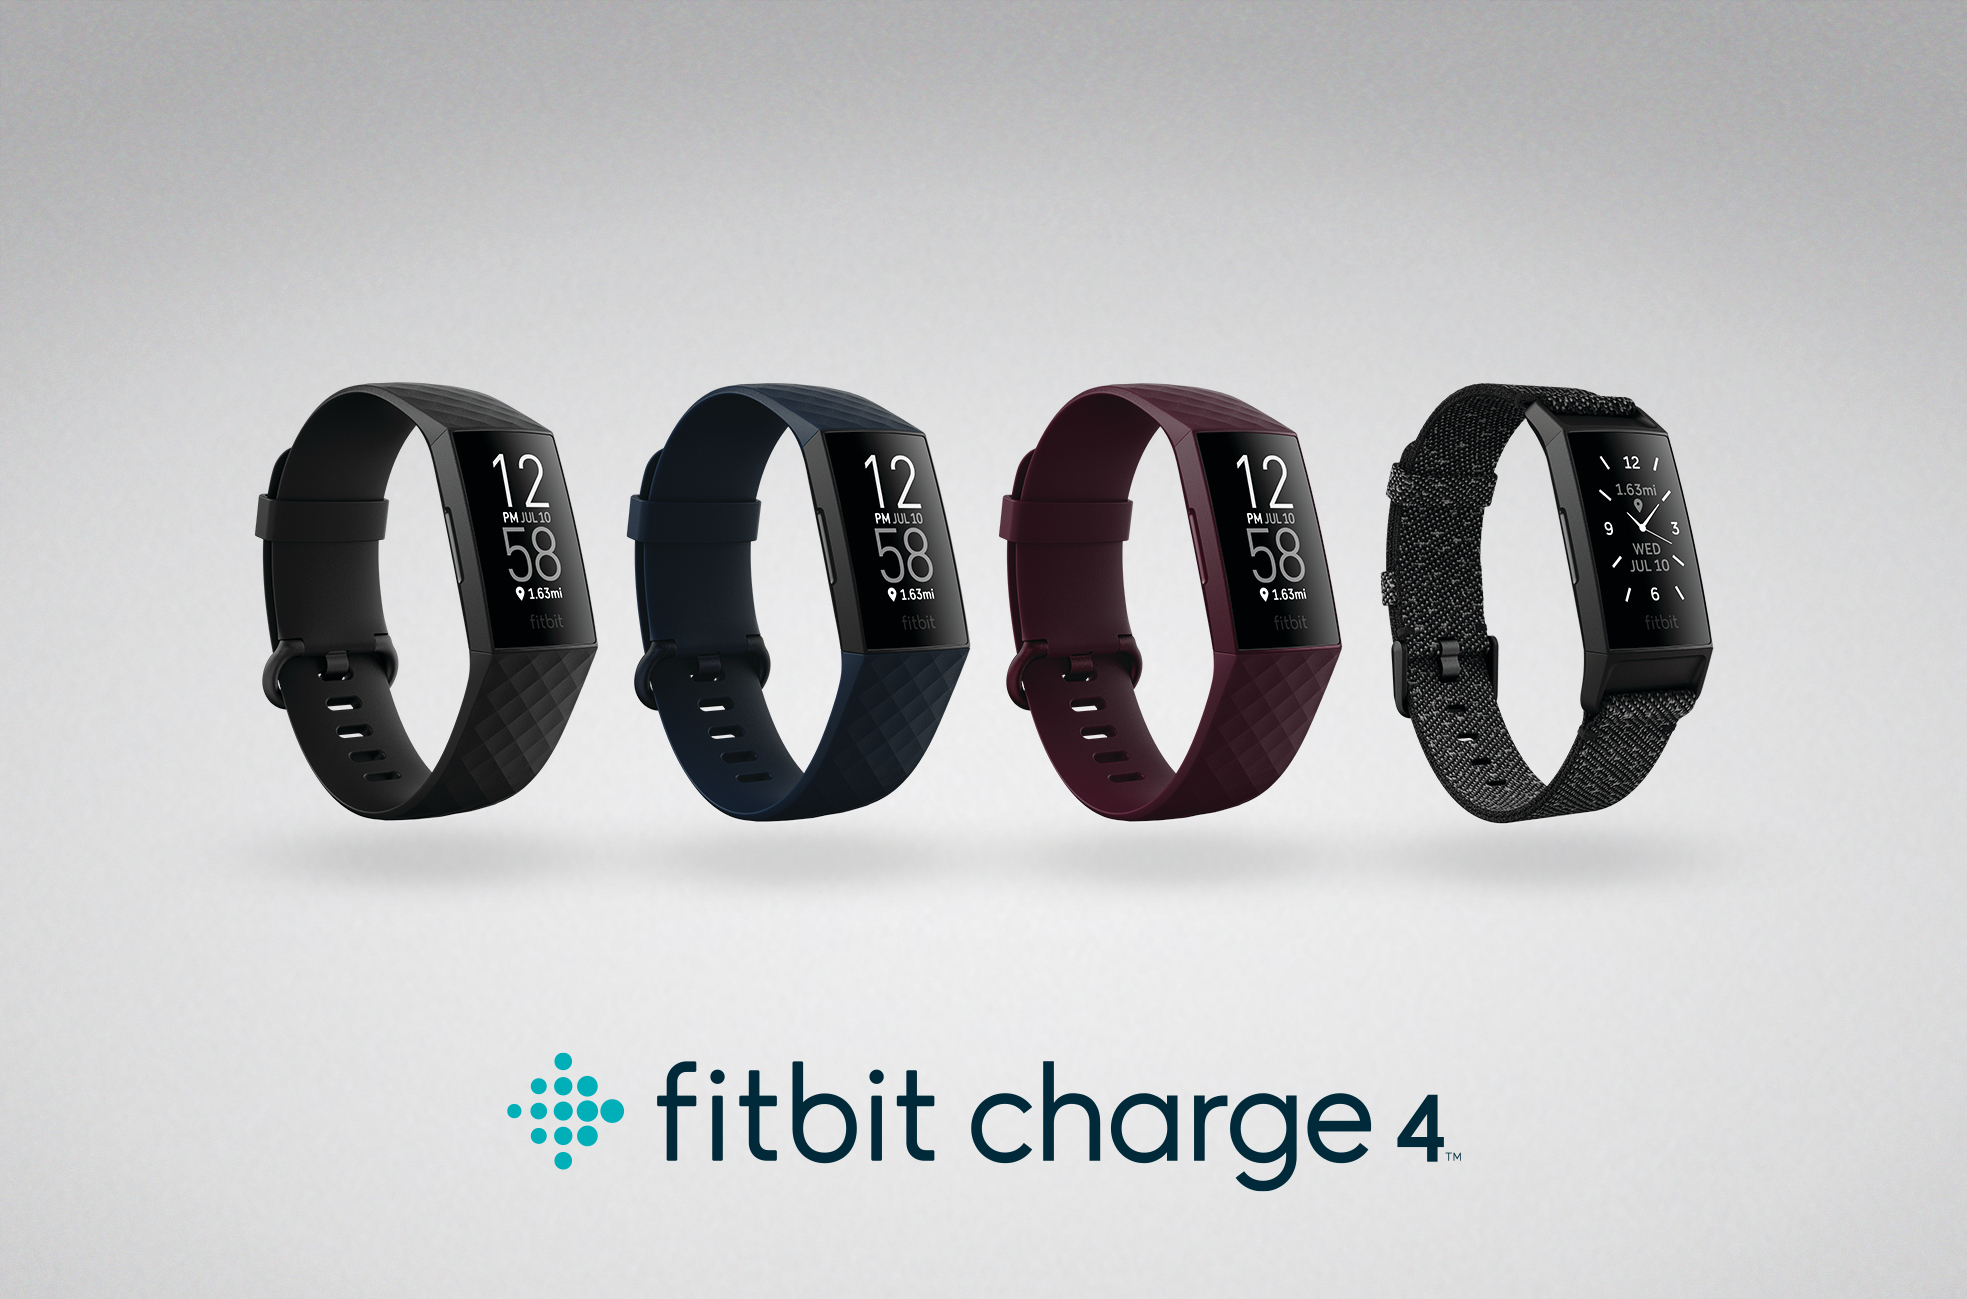 Fitbit Introduces Fitbit Charge 4, its 